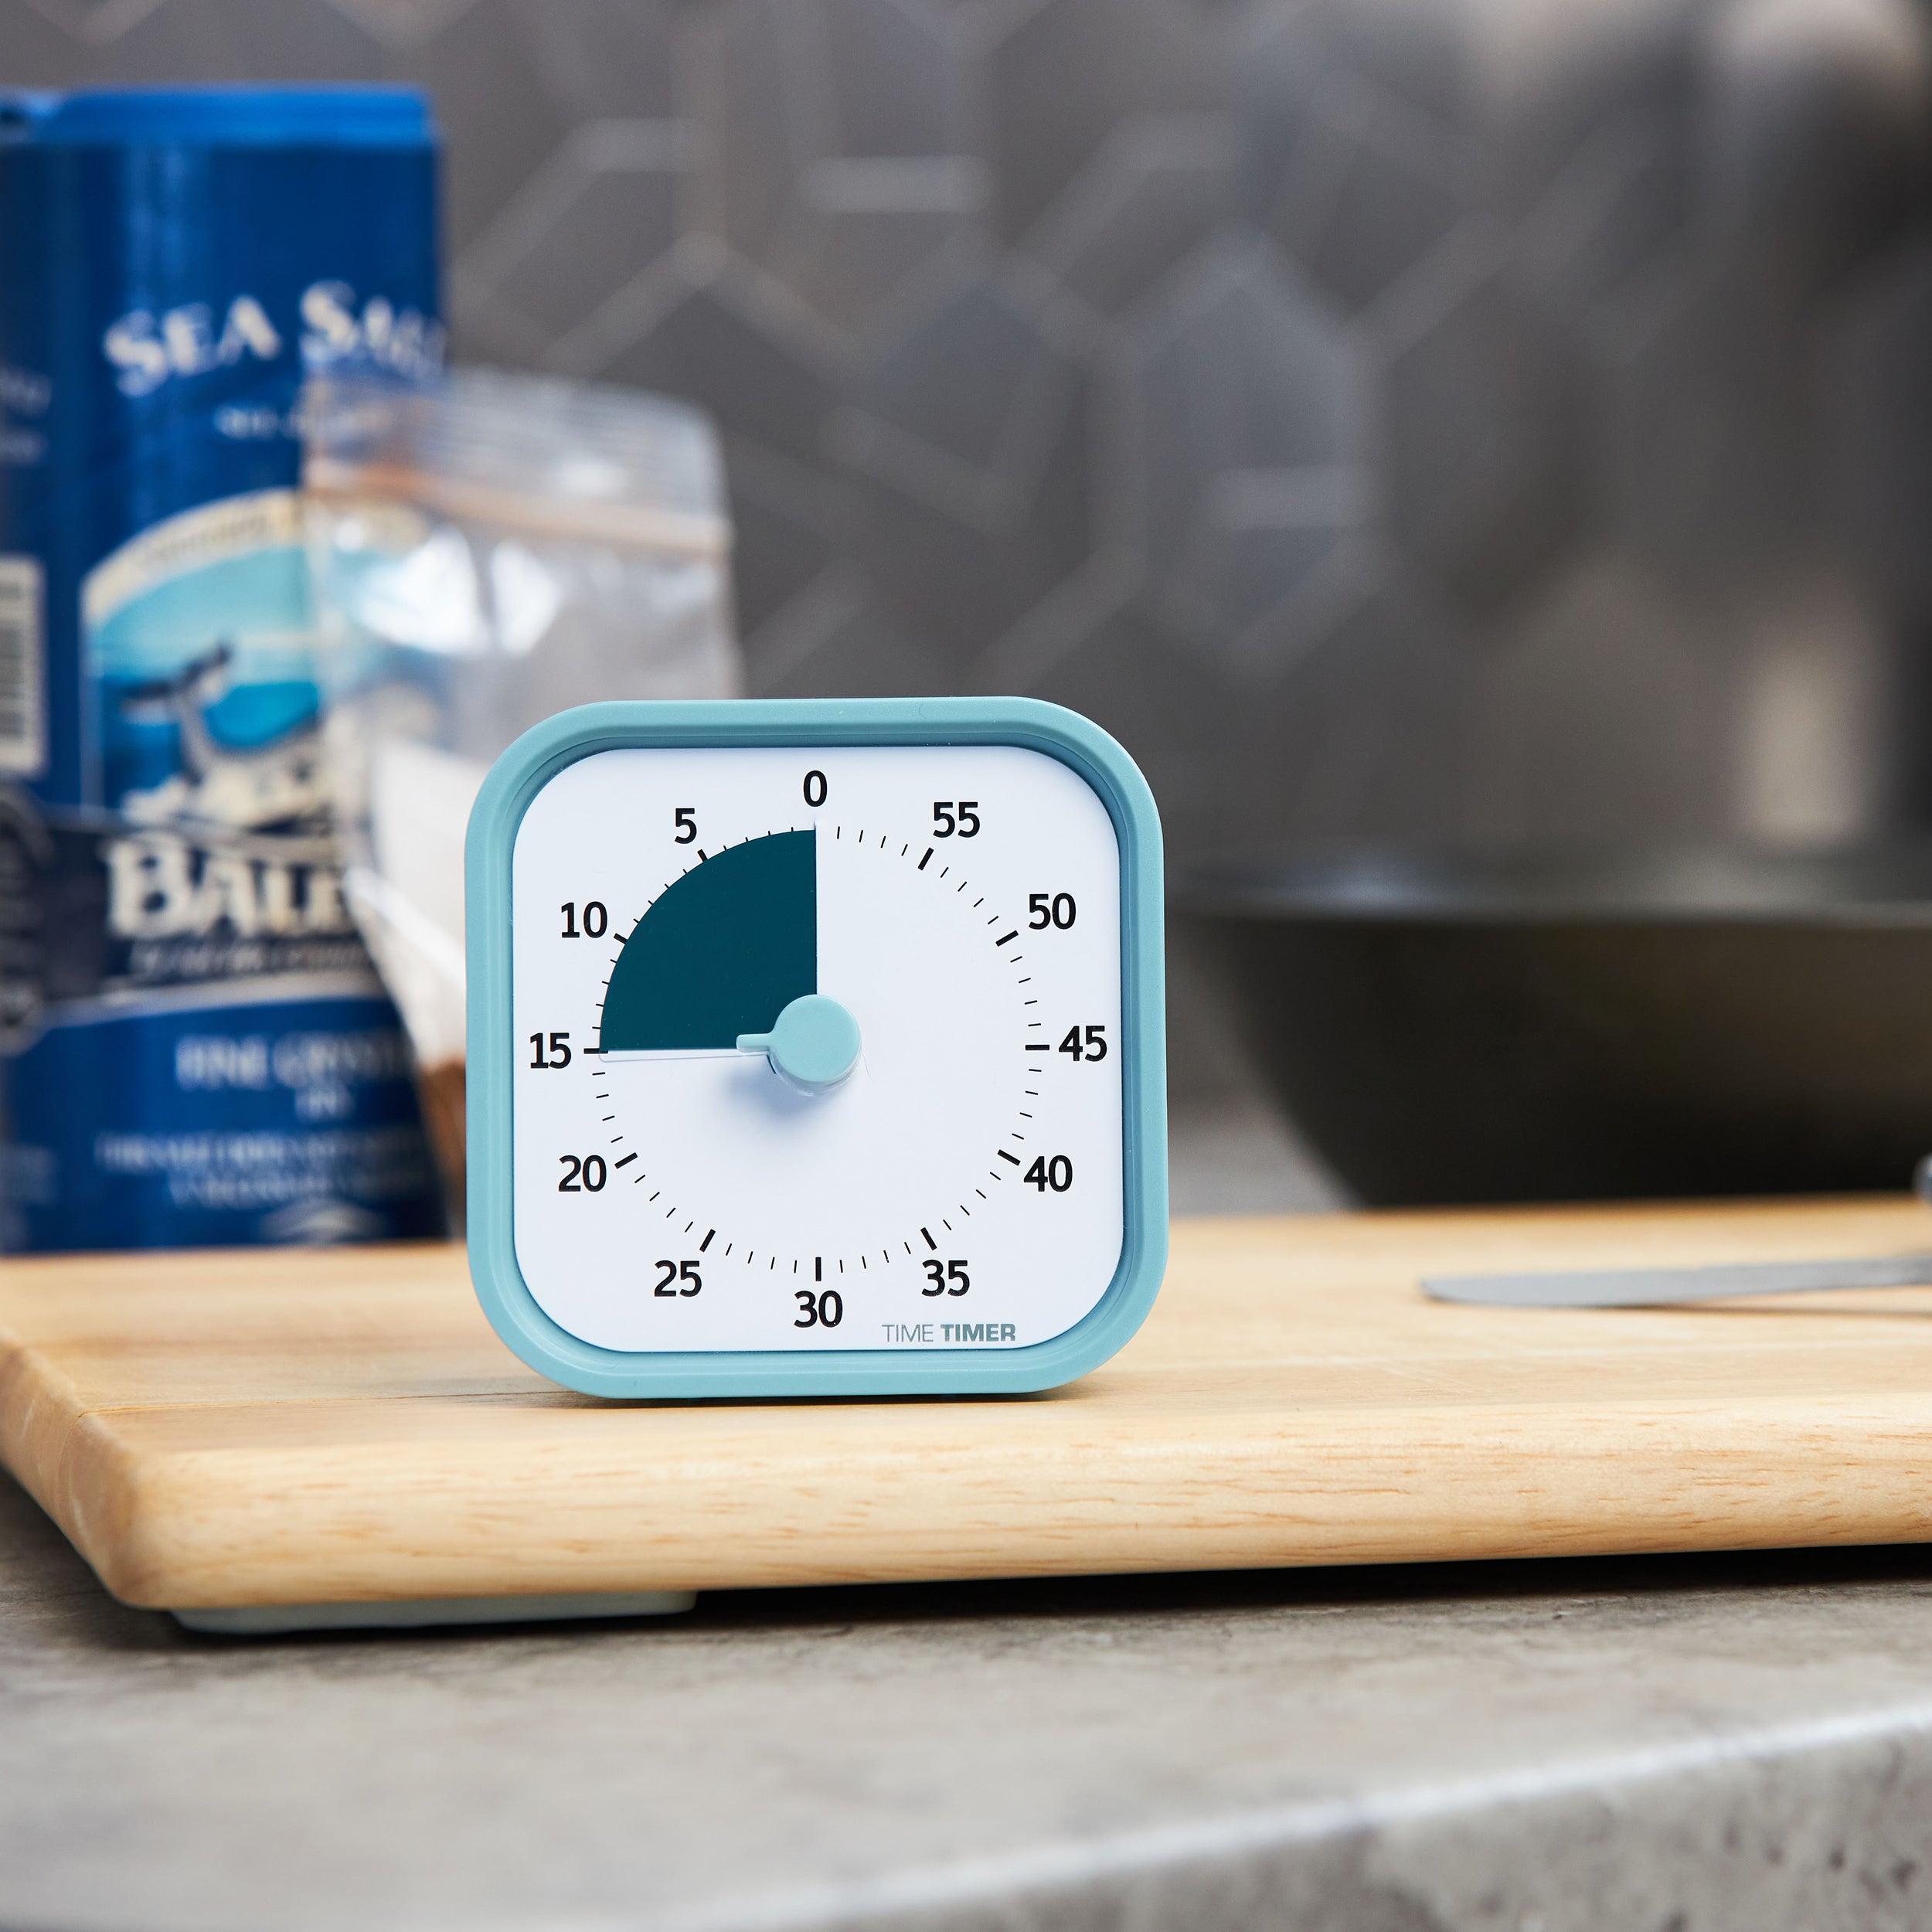 Time Timer MOD - Home Edition - This relaxing visual timer is pictured on a kitchen countertop atop a wooden cutting board with a container of salt, a baggie of spices and a bowl in the background. This is the Lake Day Blue color and has a pale blue exterior with a dark teal-blue colored disk that disappears as time elapses.